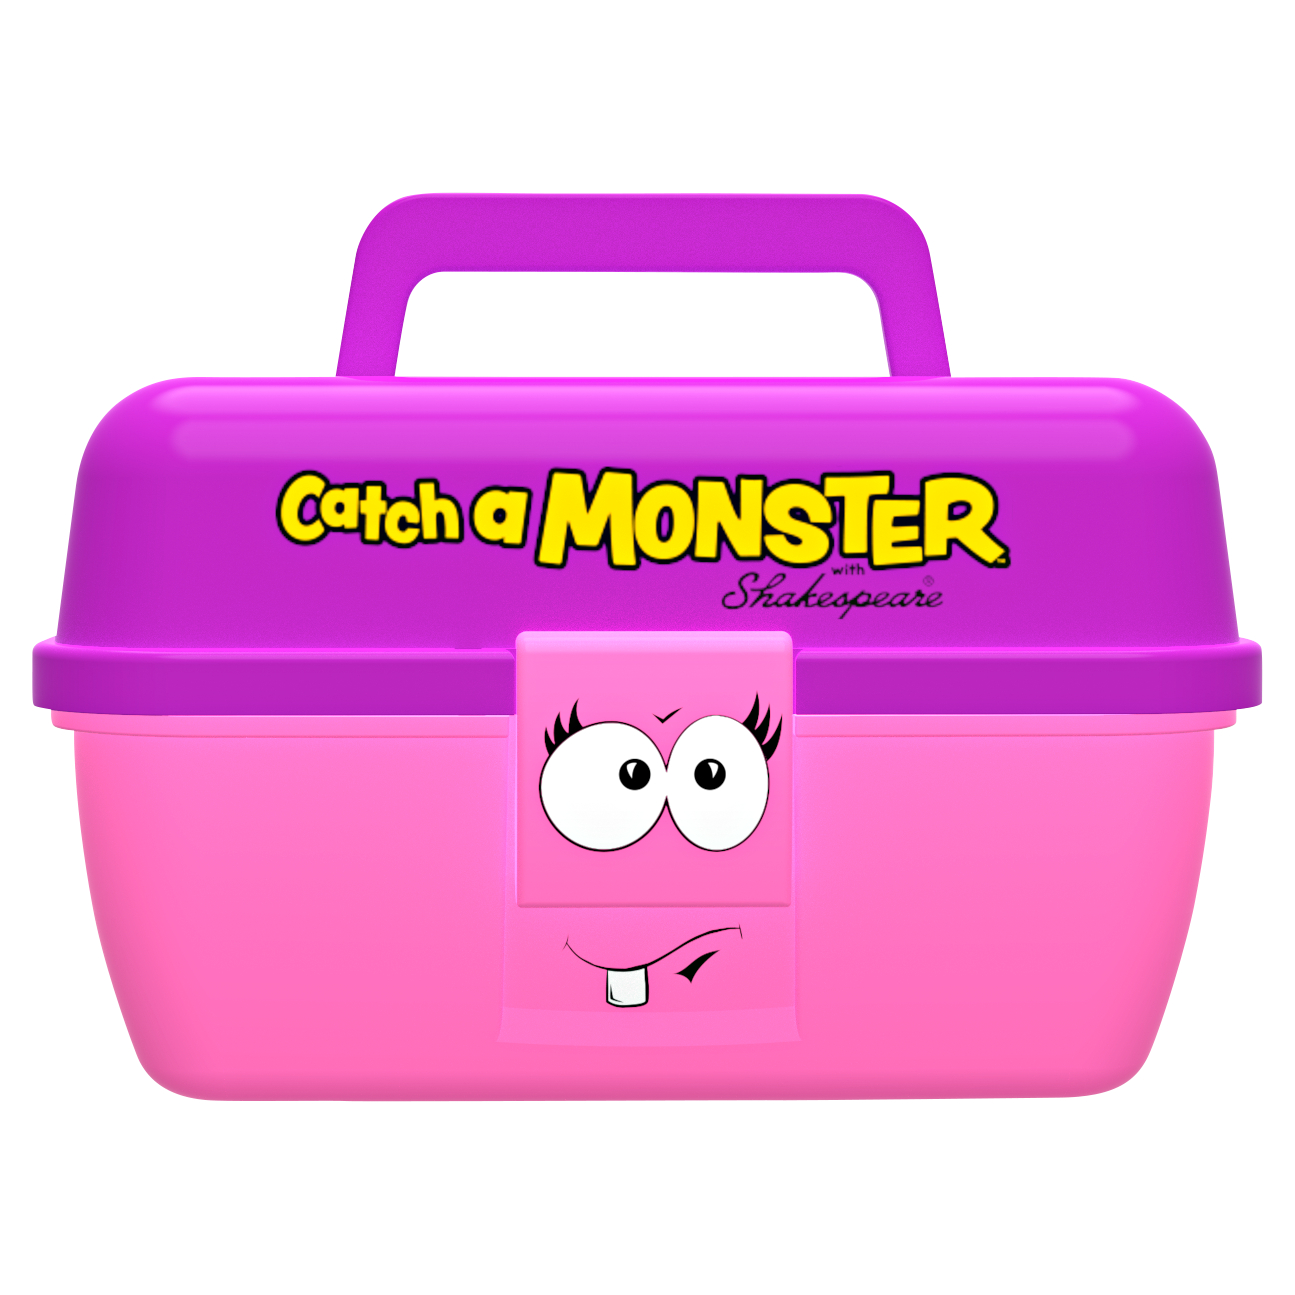 Shakespeare Mehrzweckbox Catch a Monster Play Box (pink) 